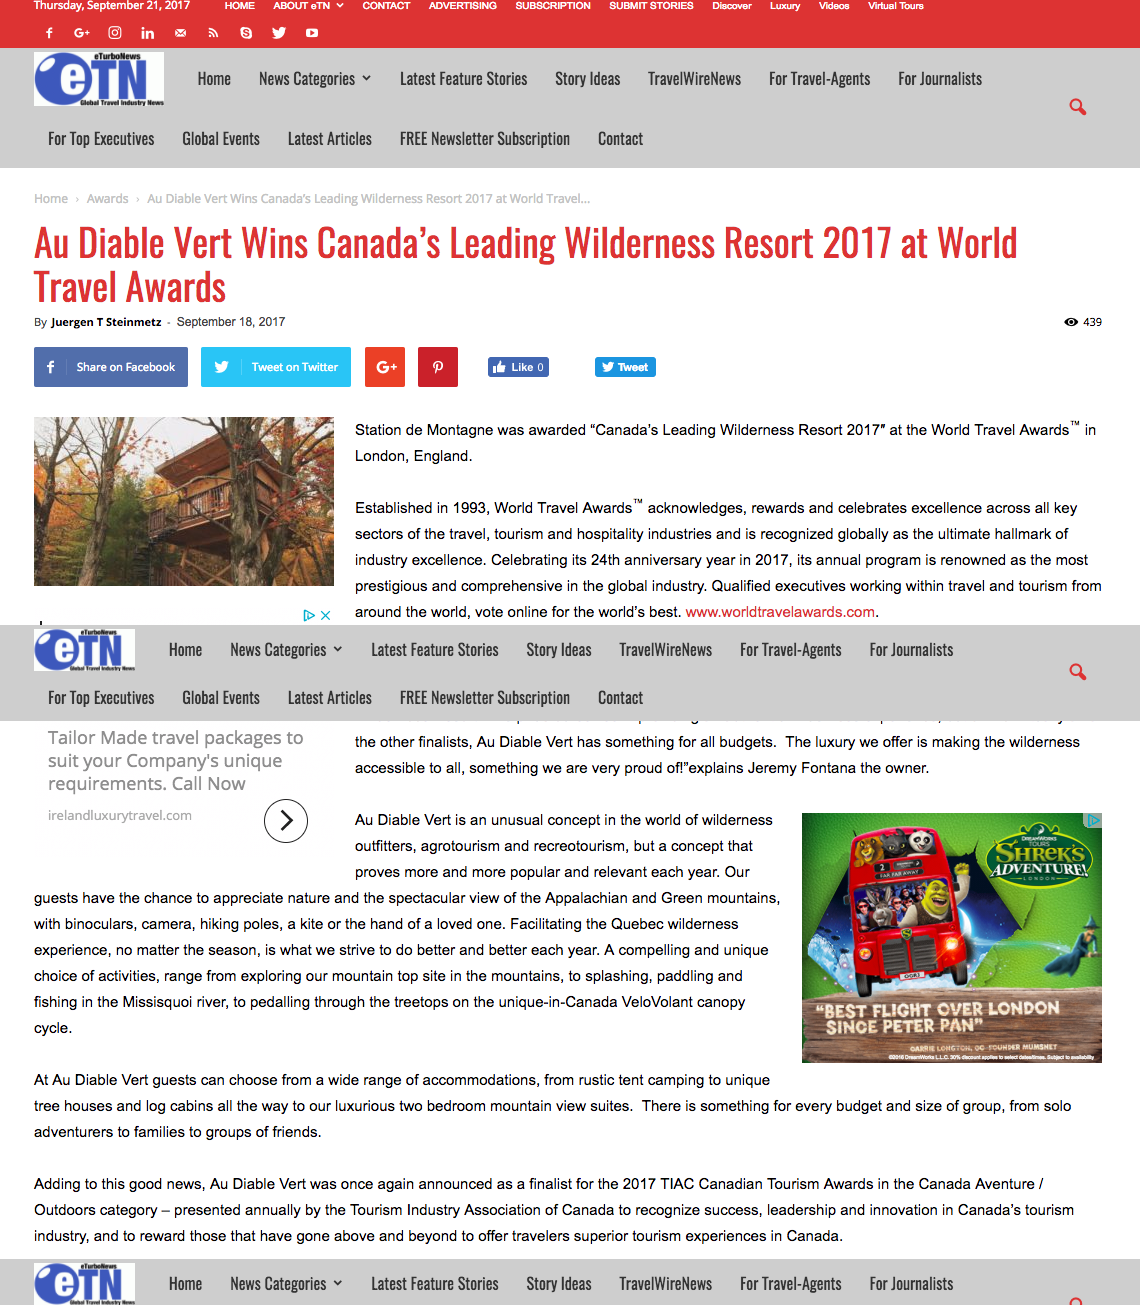 Au Diable Vert Wins Canada’s Leading Wilderness Resort 2017 at World Travel Awards